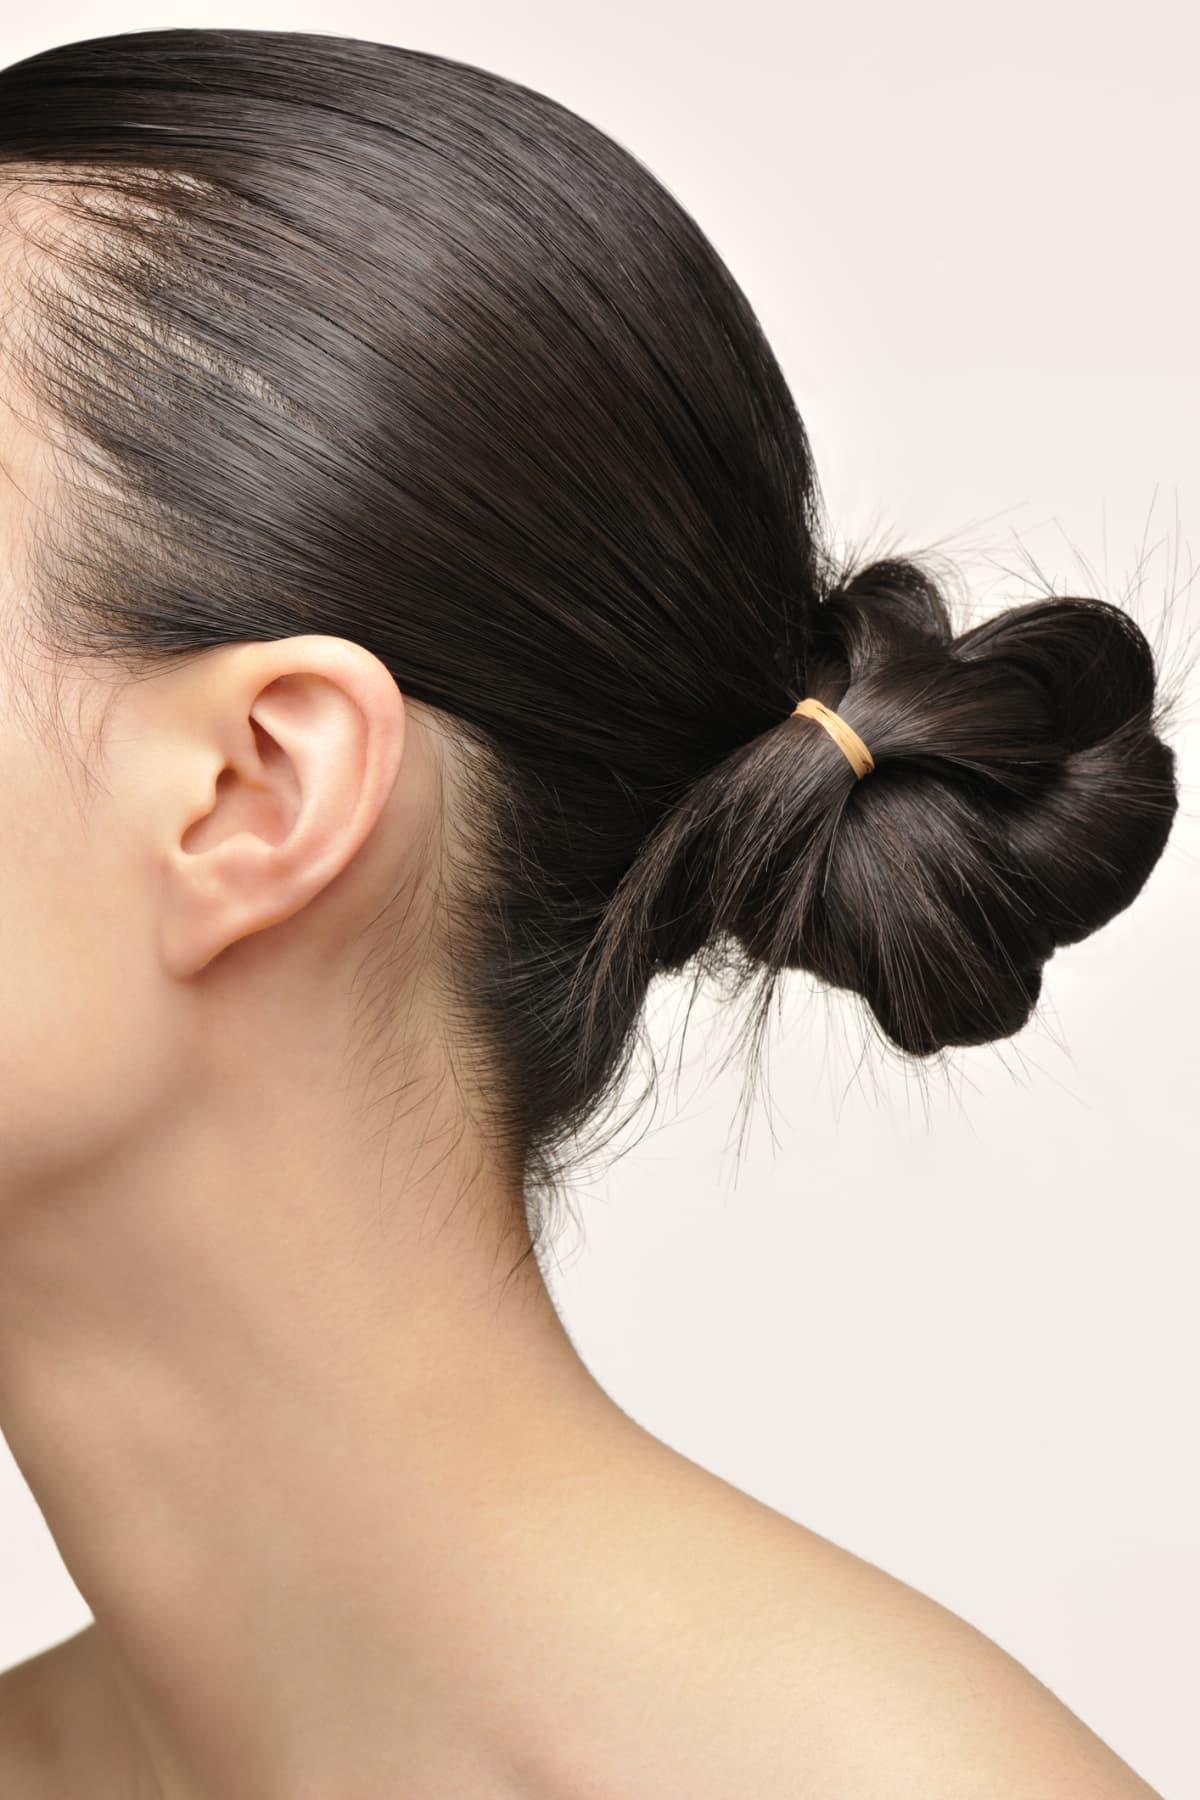 Woman's profile with her hair tied in a bun at the base of her head